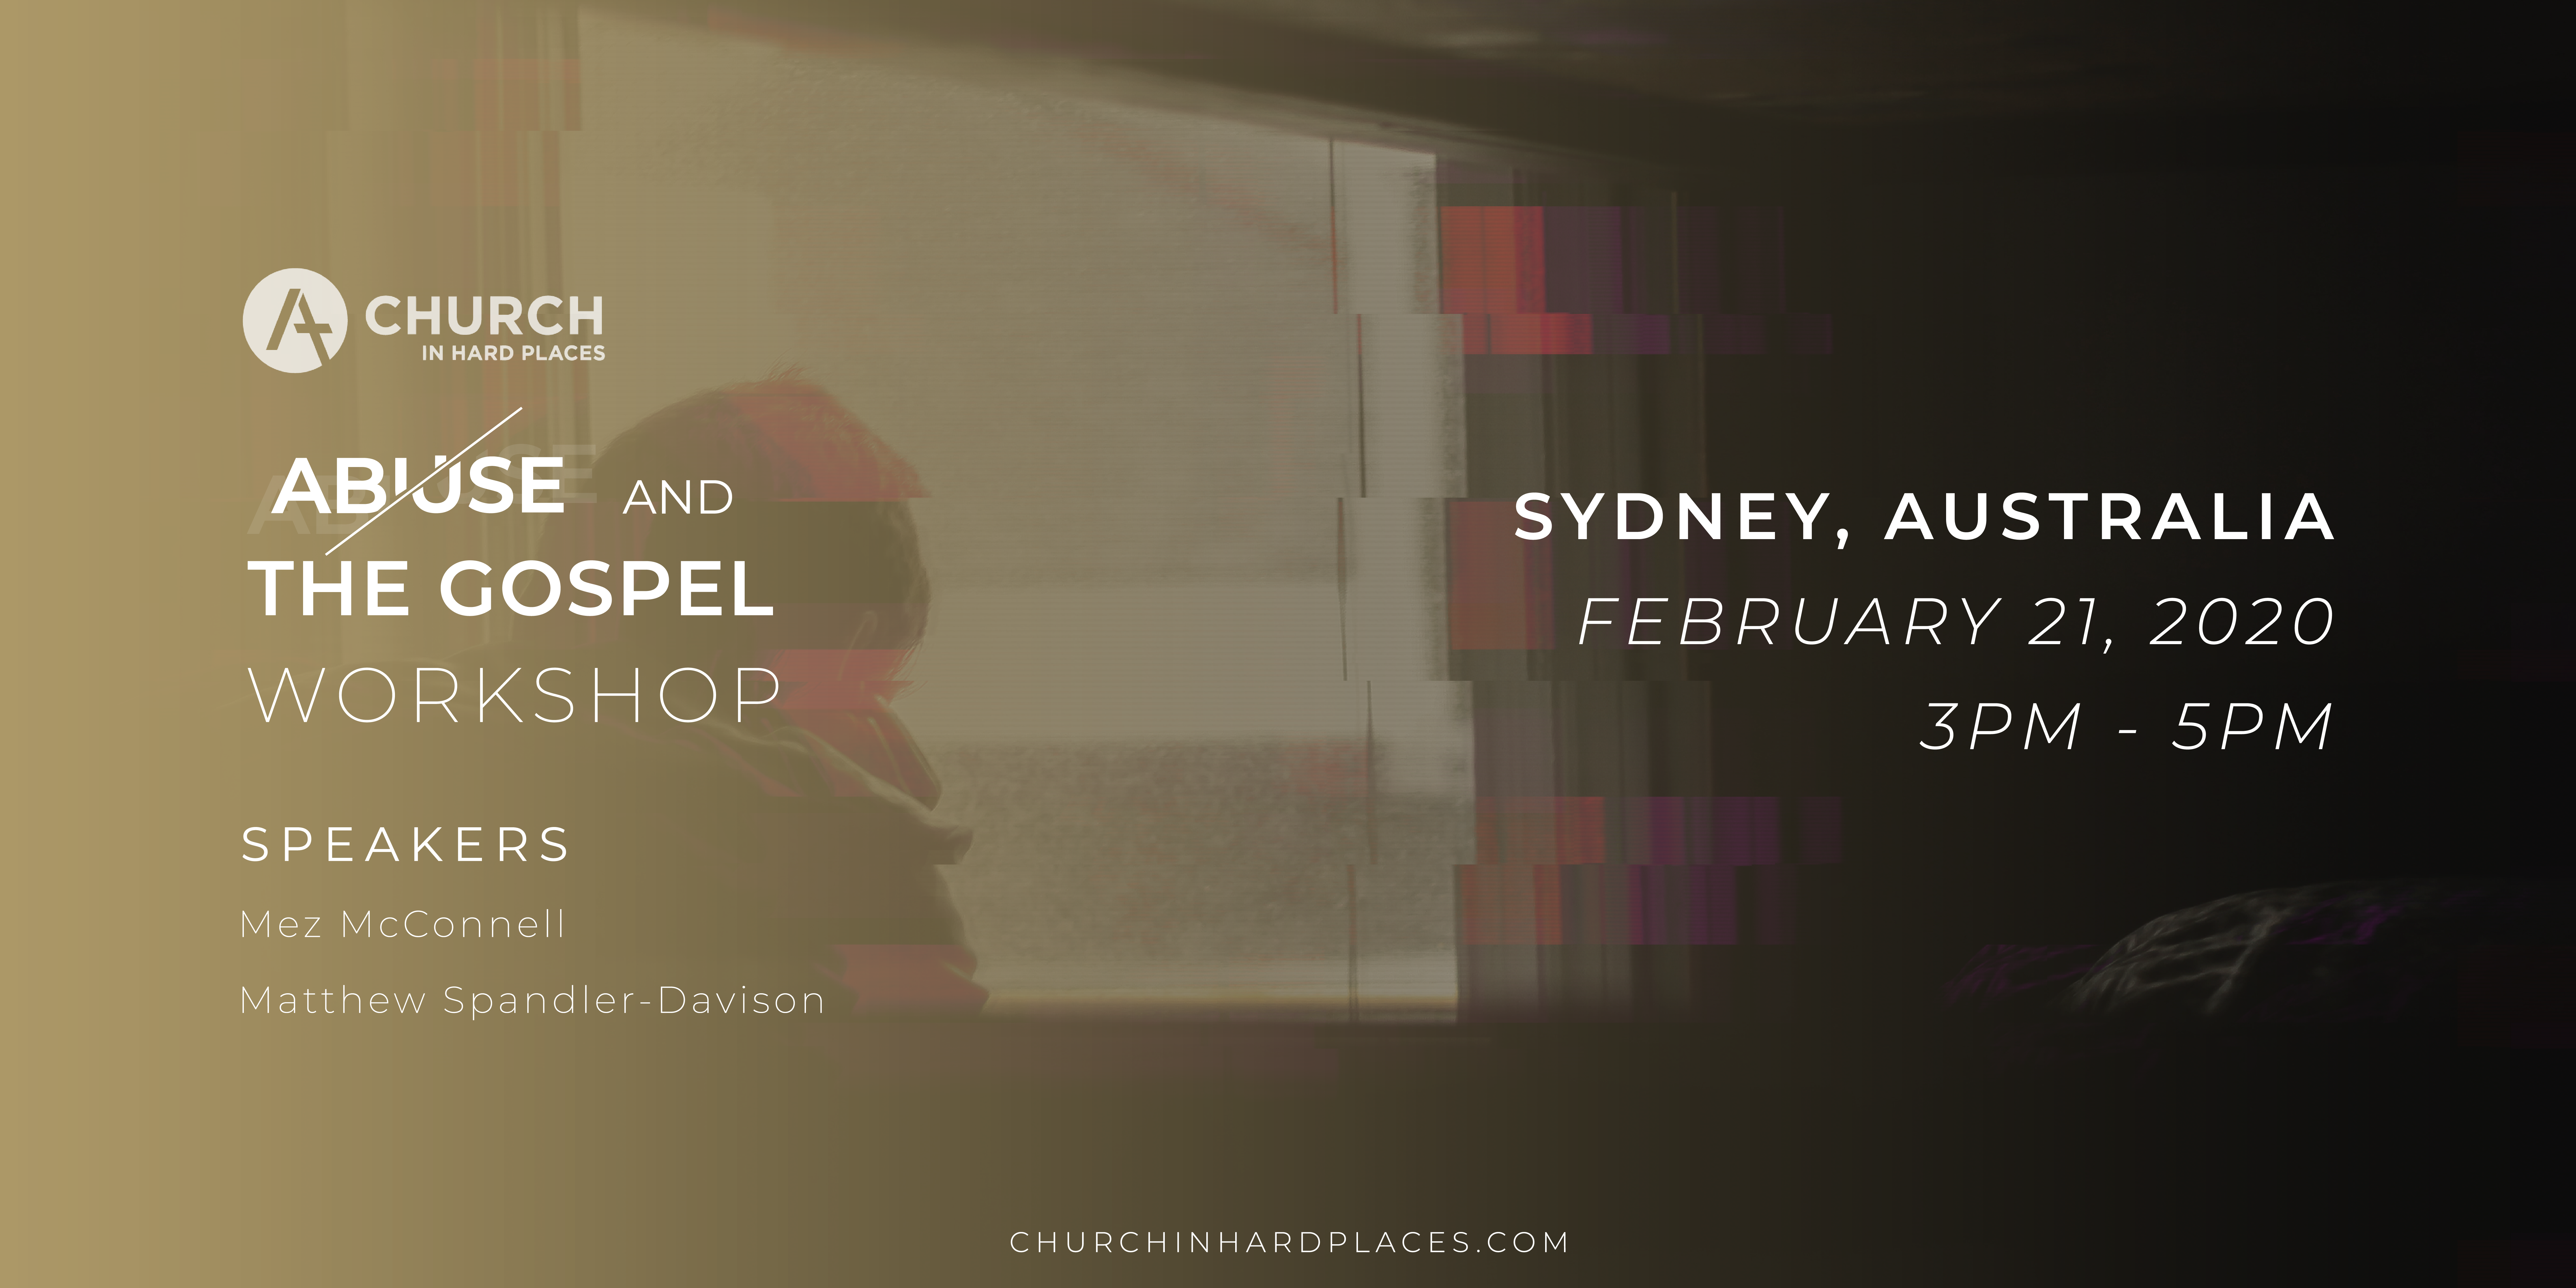 Abuse and the Gospel Workshop - Church in Hard Places- Sydney